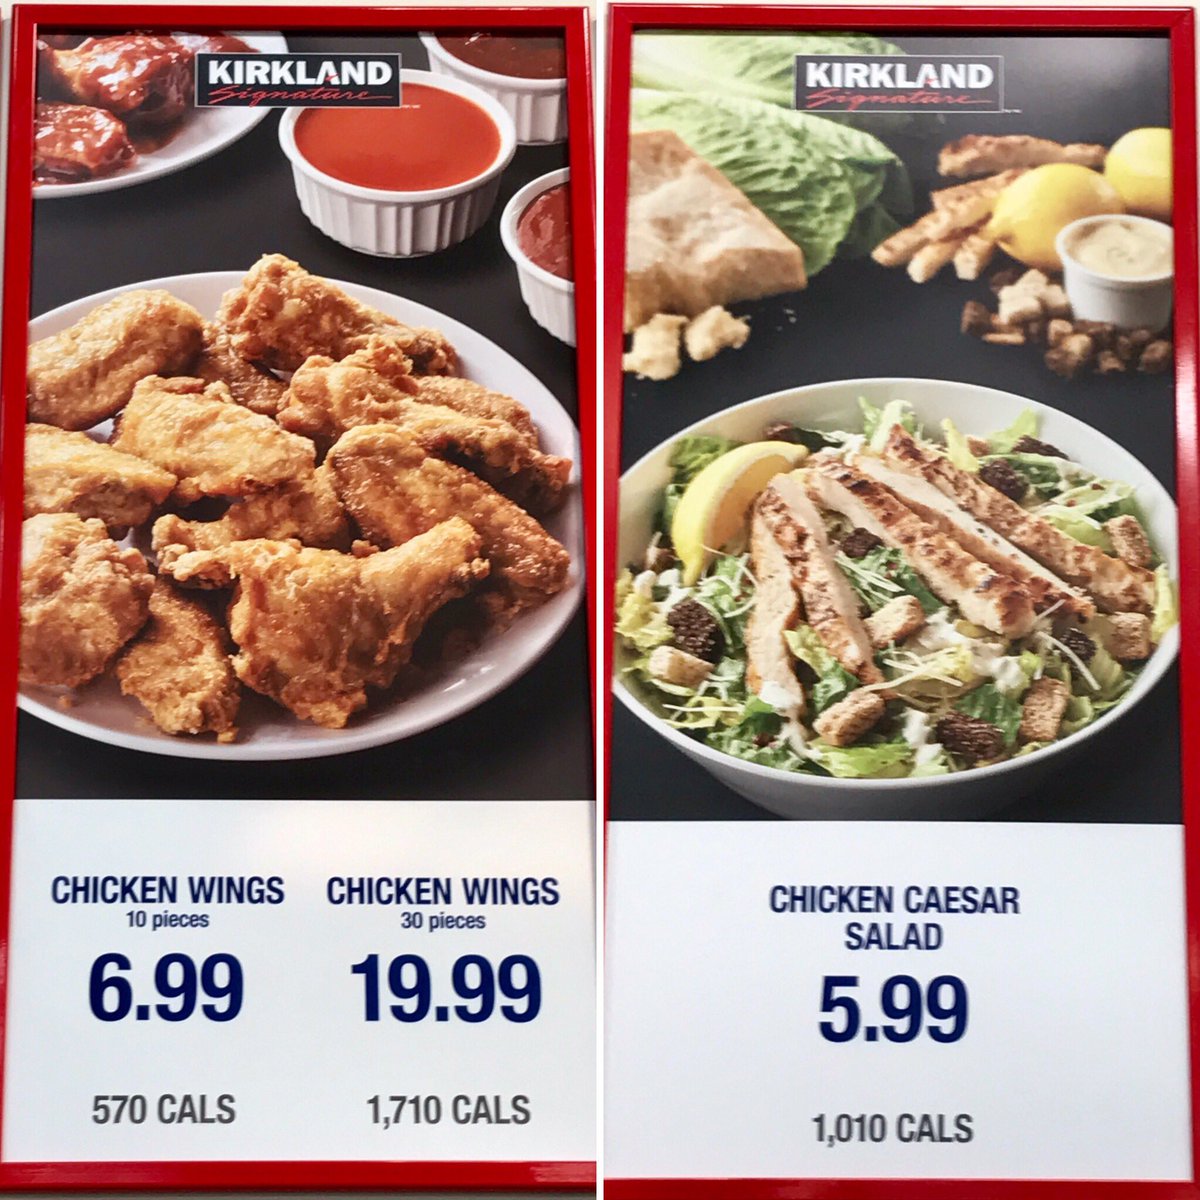 Yoni Freedhoff Md On Twitter Sure You Knew Costco S Caesar Salad Had A Lot Of Calories But Nearly 20 Chicken Wings Worth Calories Aren T Intuitive Https T Co Fclnp9vdso